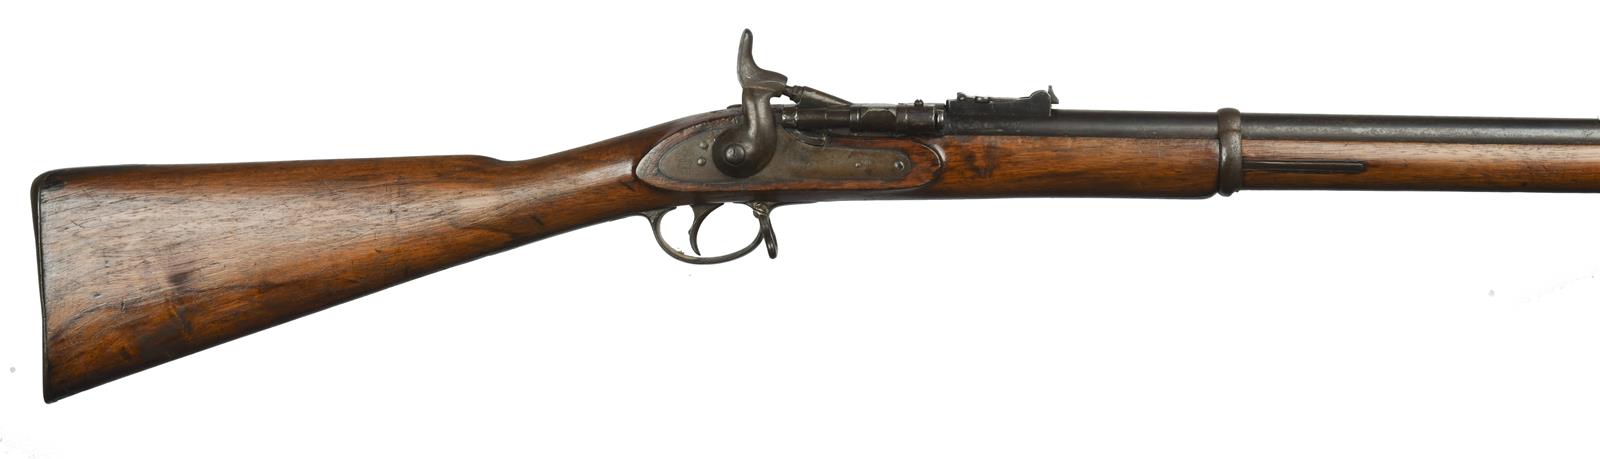 A British .577 Snider Enfield three band service rifle, barrel 36.5 in., of standard